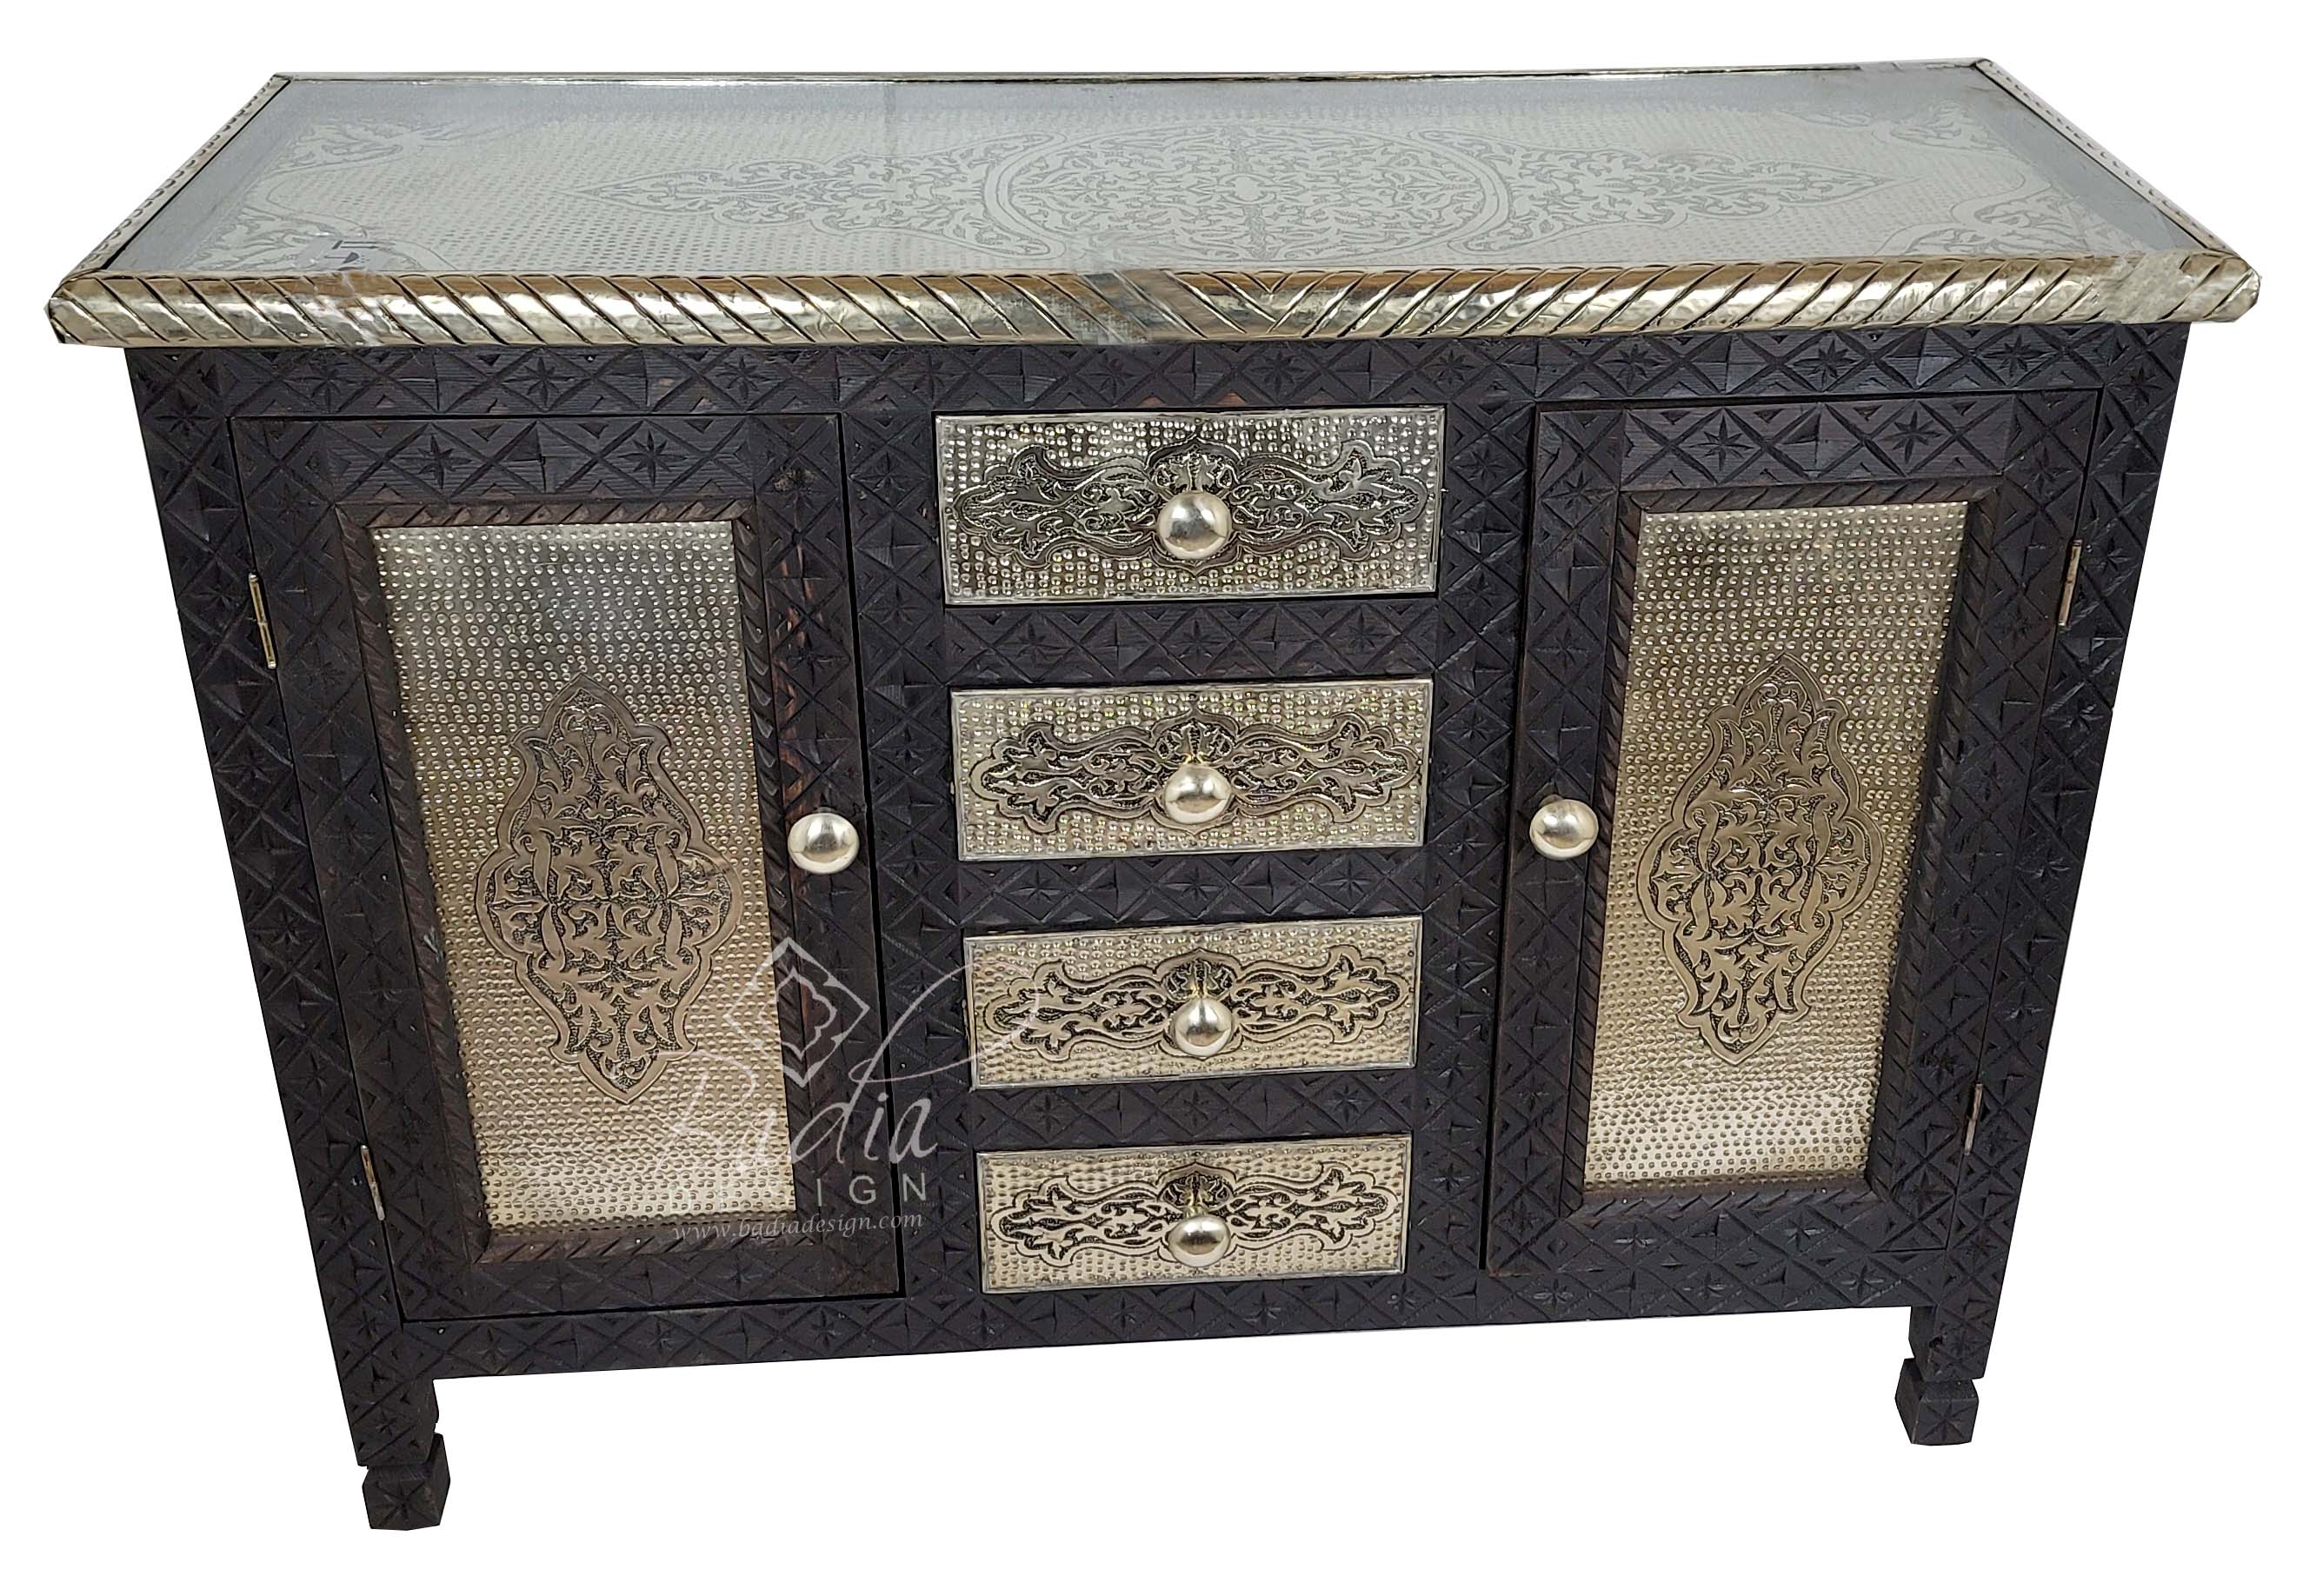 large-moroccan-wood-and-silver-nickel-storage-cabinet-nk-ca050-1.jpg